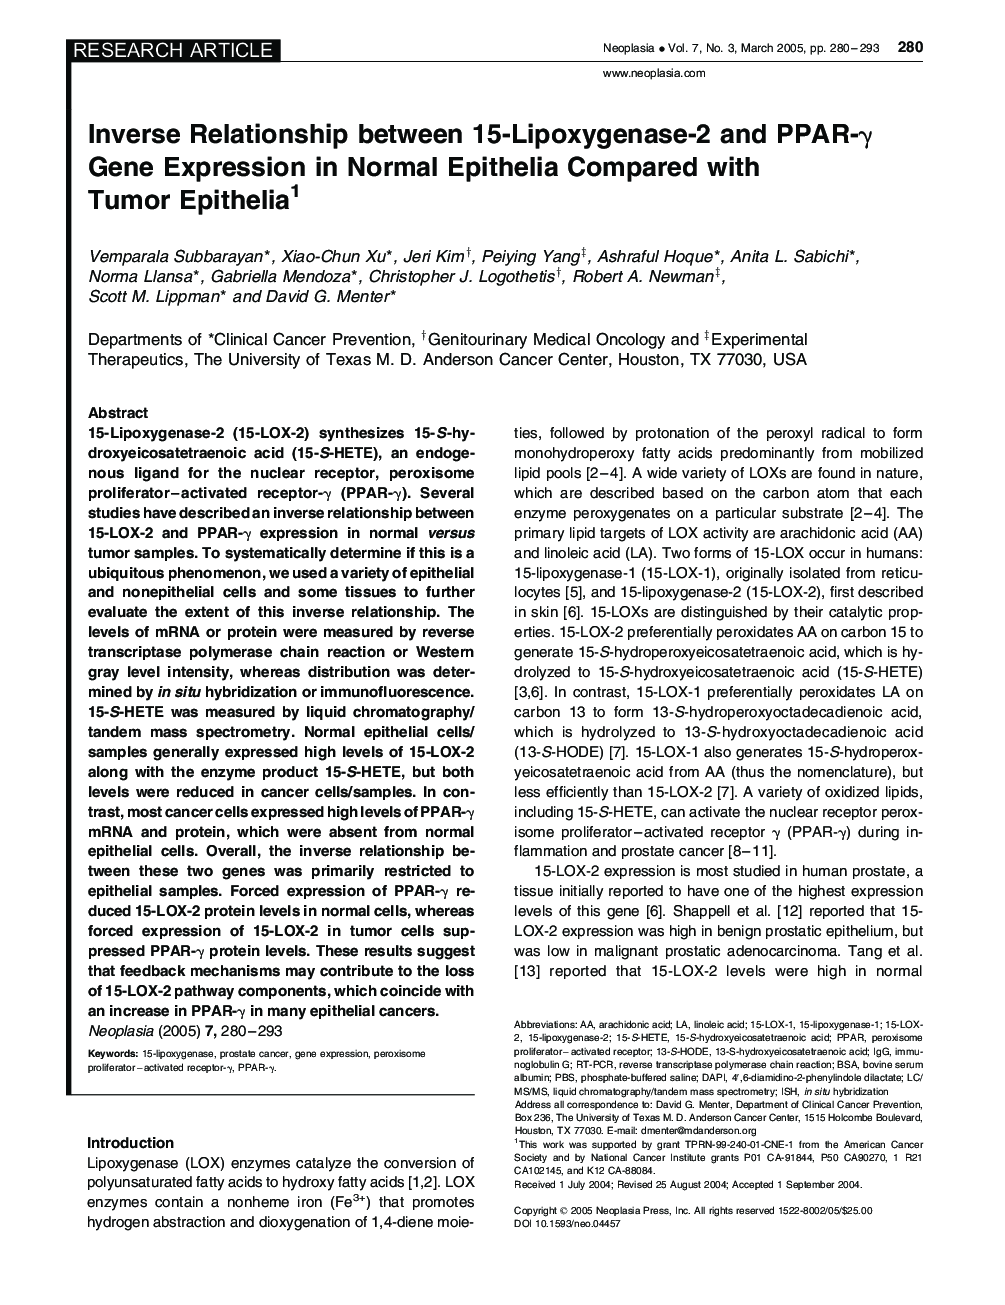 Inverse Relationship between 15-Lipoxygenase-2 and PPAR-Î³ Gene Expression in Normal Epithelia Compared with Tumor Epithelia